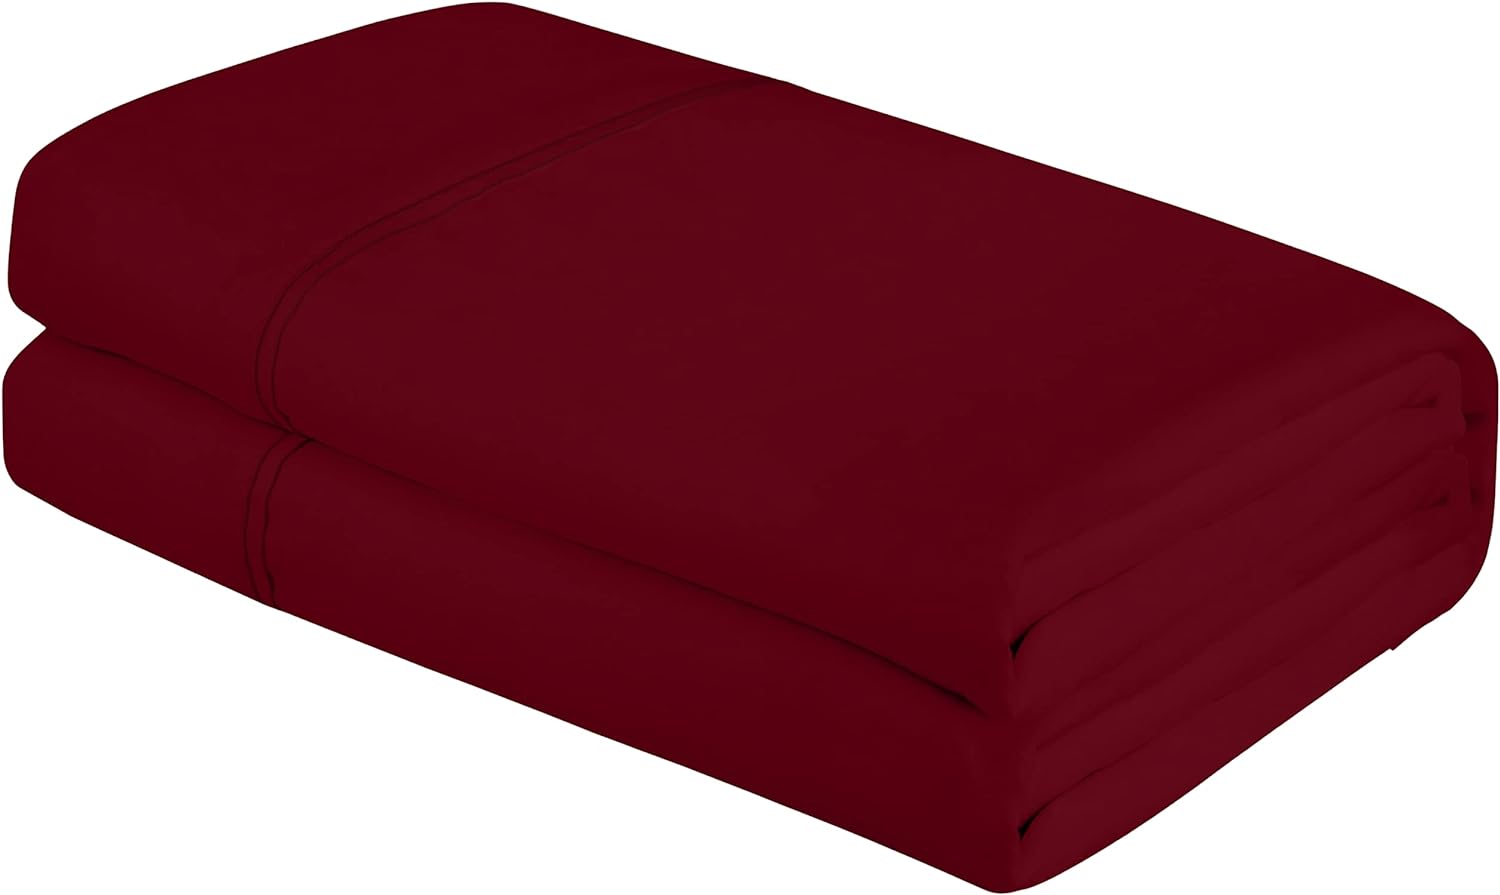 ROYALE LINENS Twin Size Flat Sheet Only - Brushed 1800 Microfiber - Ultra Soft & Breathable - Wrinkle & Stain Resistant - Hotel Quality Flat Sheet Sold Separately - Top Sheet for Bed (Twin, Burgundy)